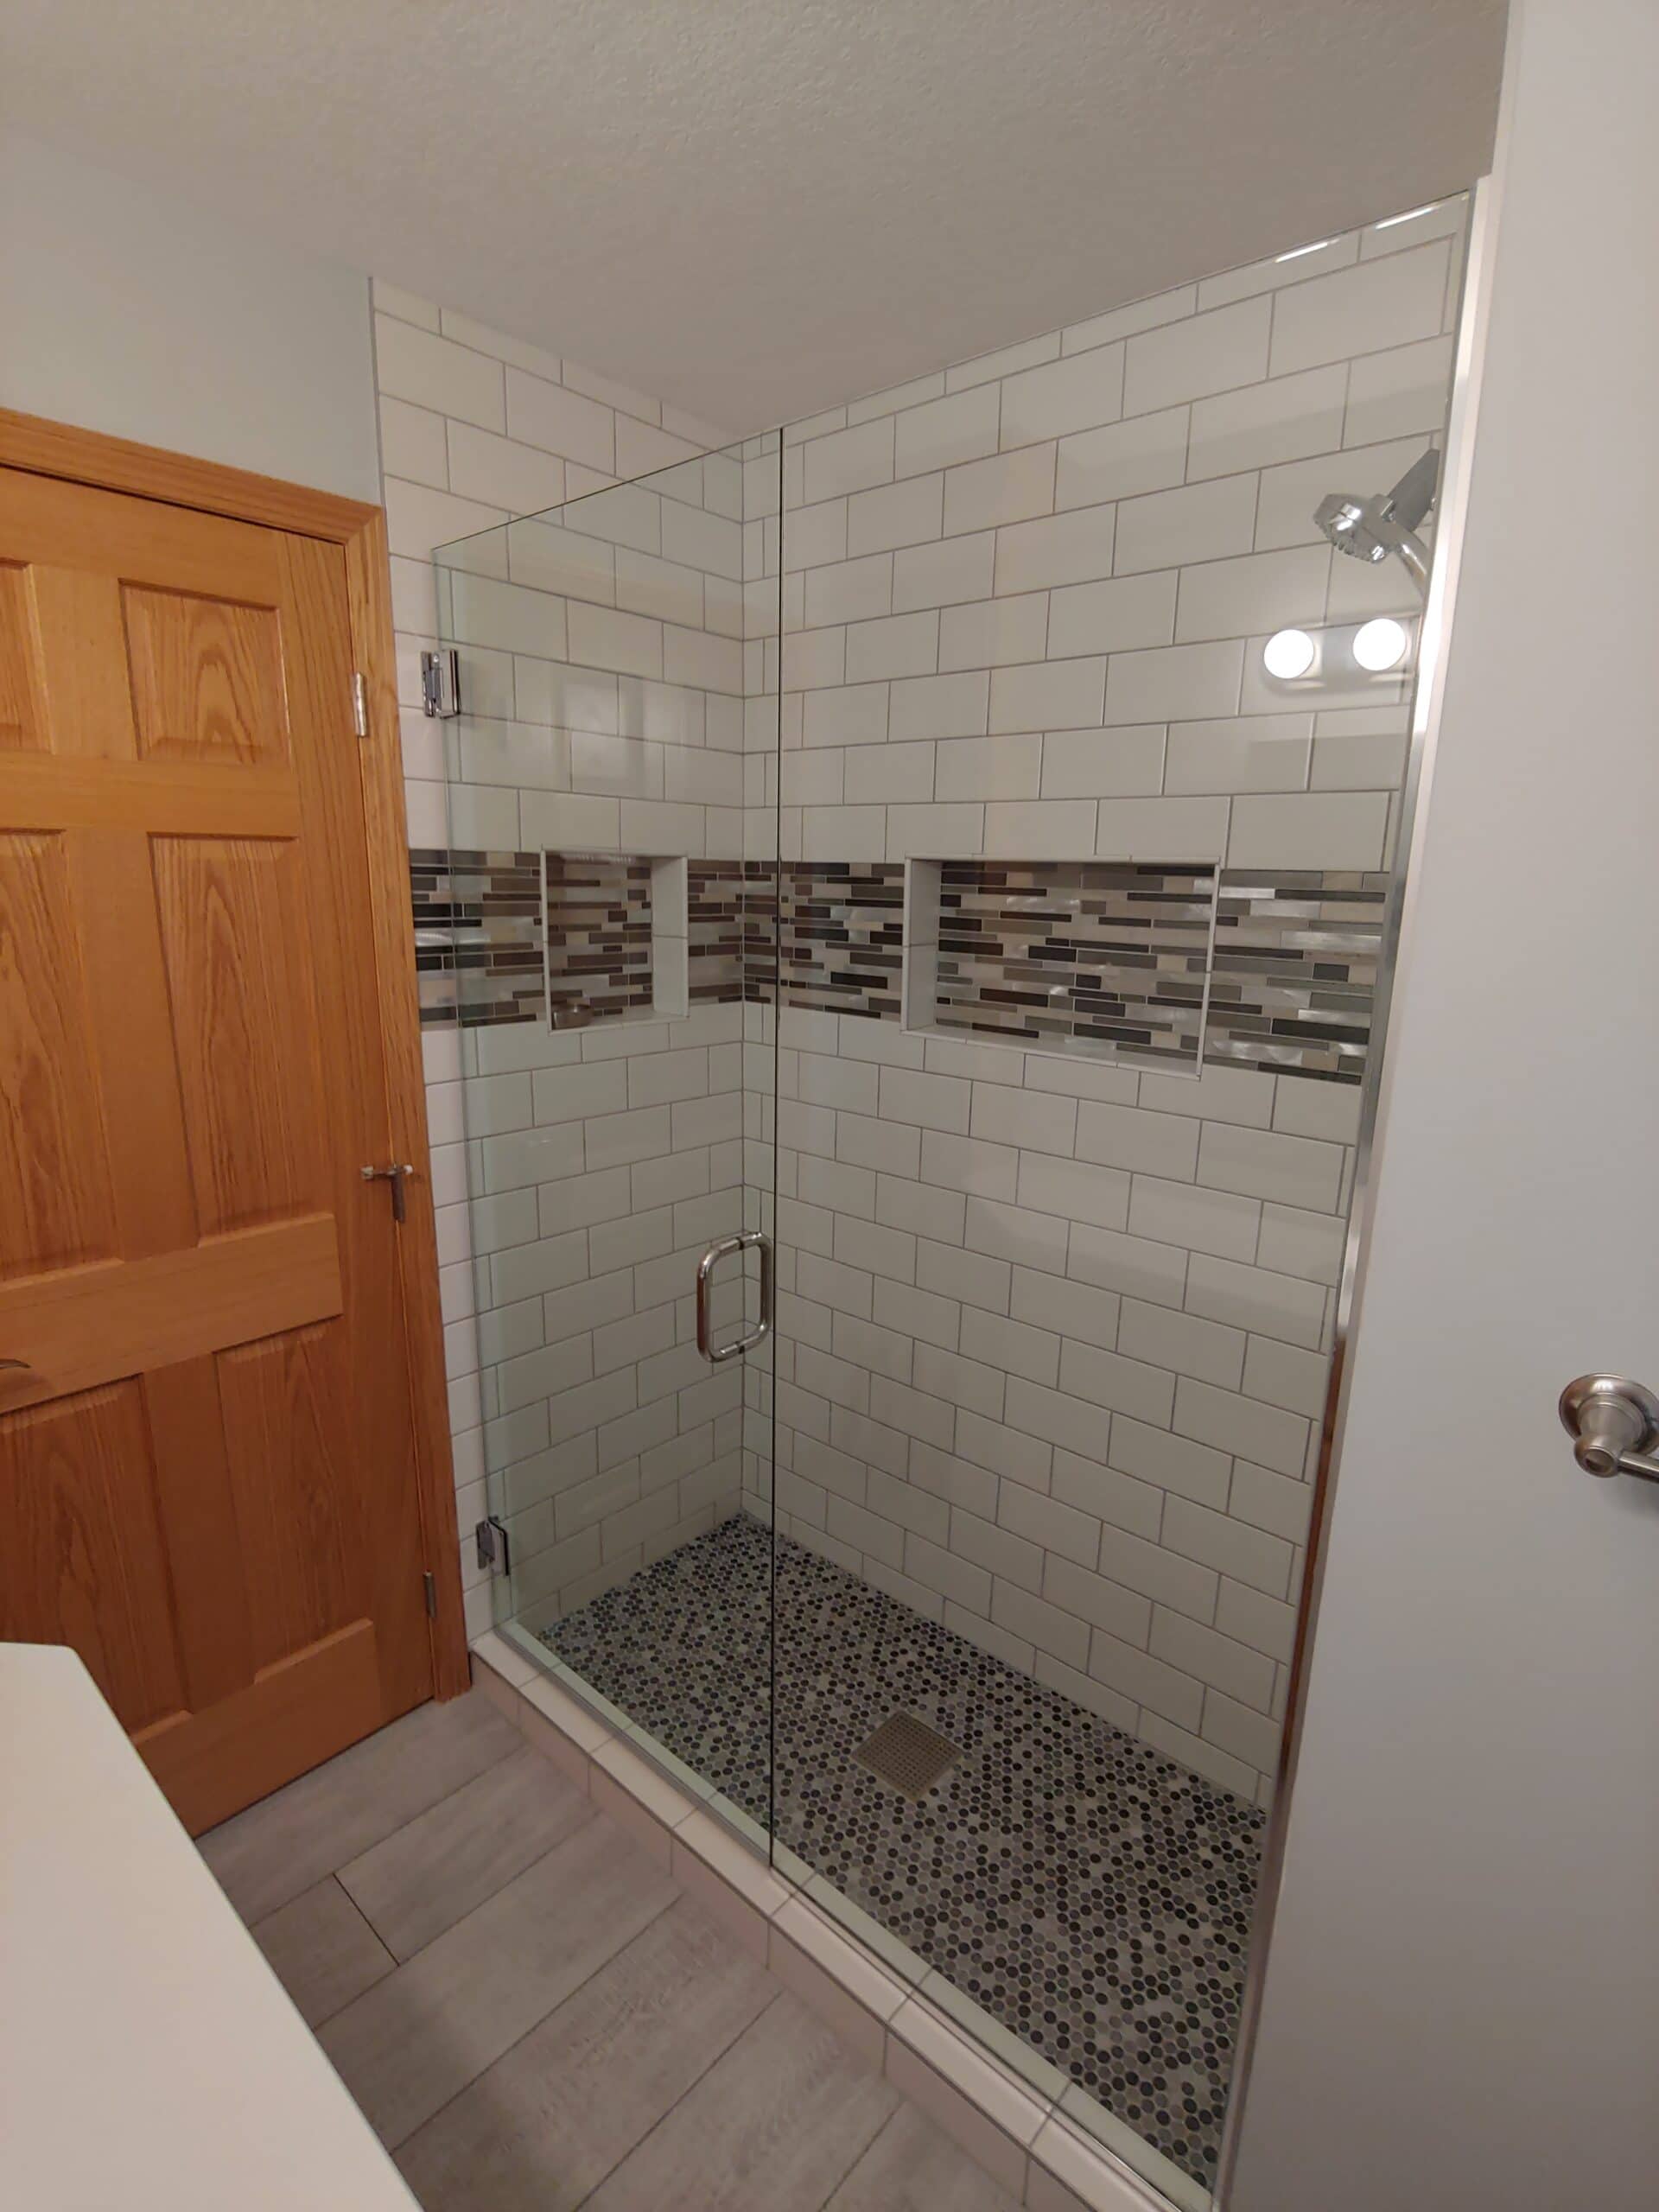 luxury bathroom remodeling company in Savage, MN